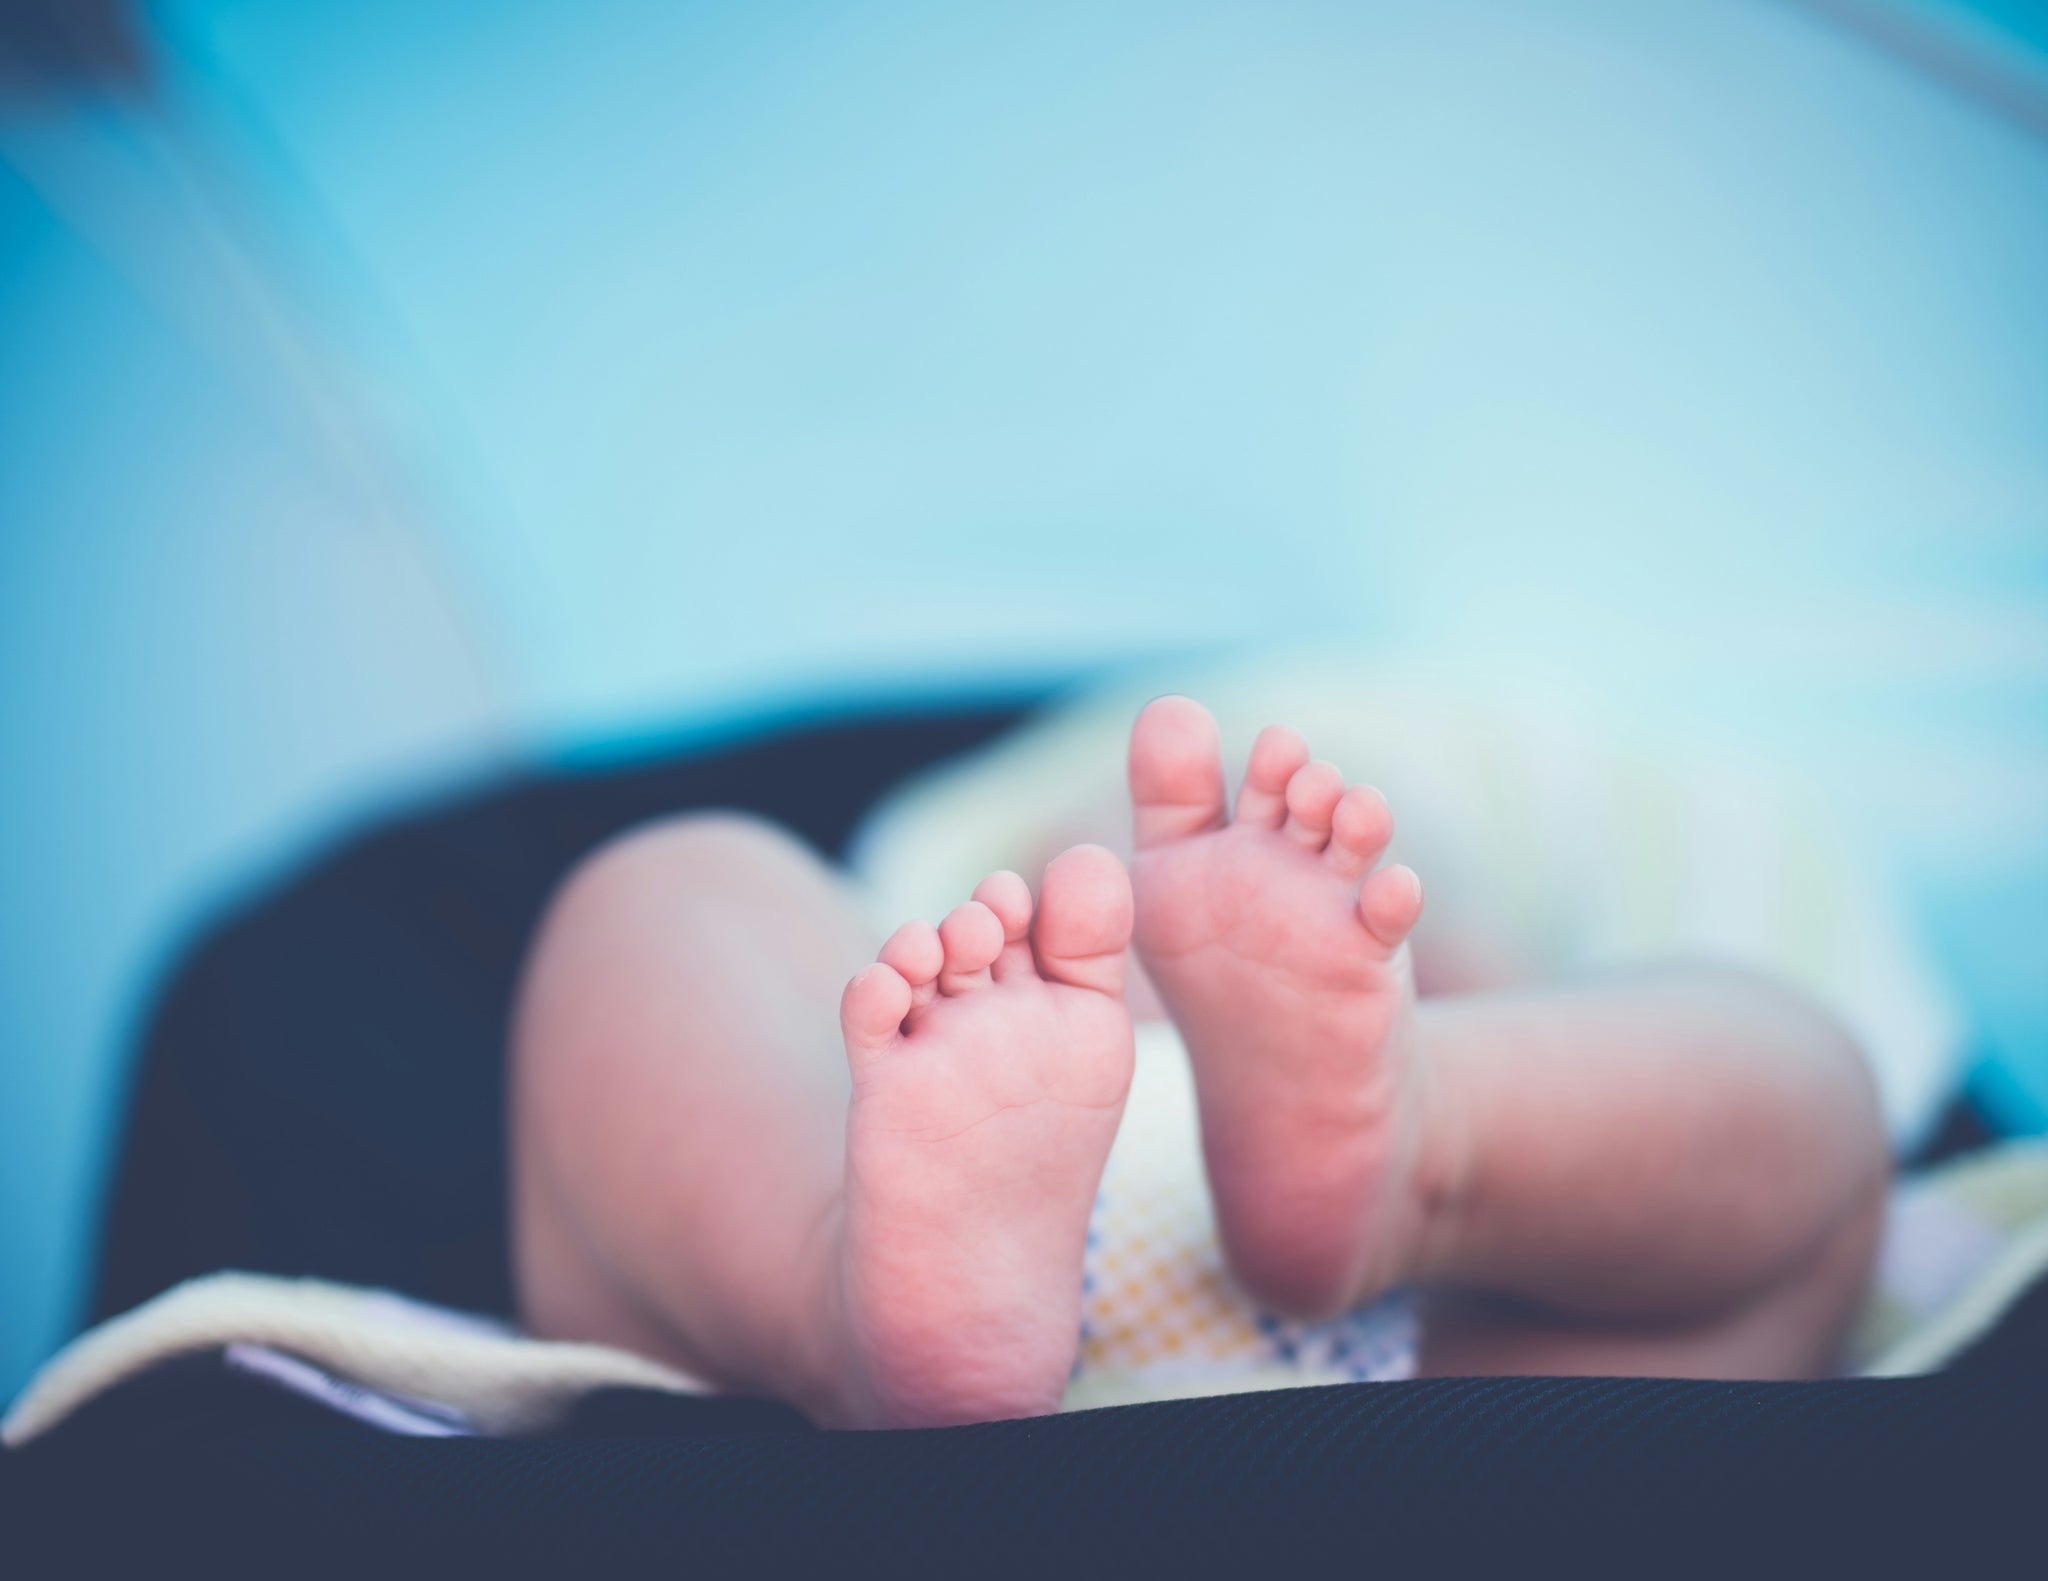 Why Won’t My Newborn Sleep? Common Causes for a Newborn Not Sleeping & Quick Fixes